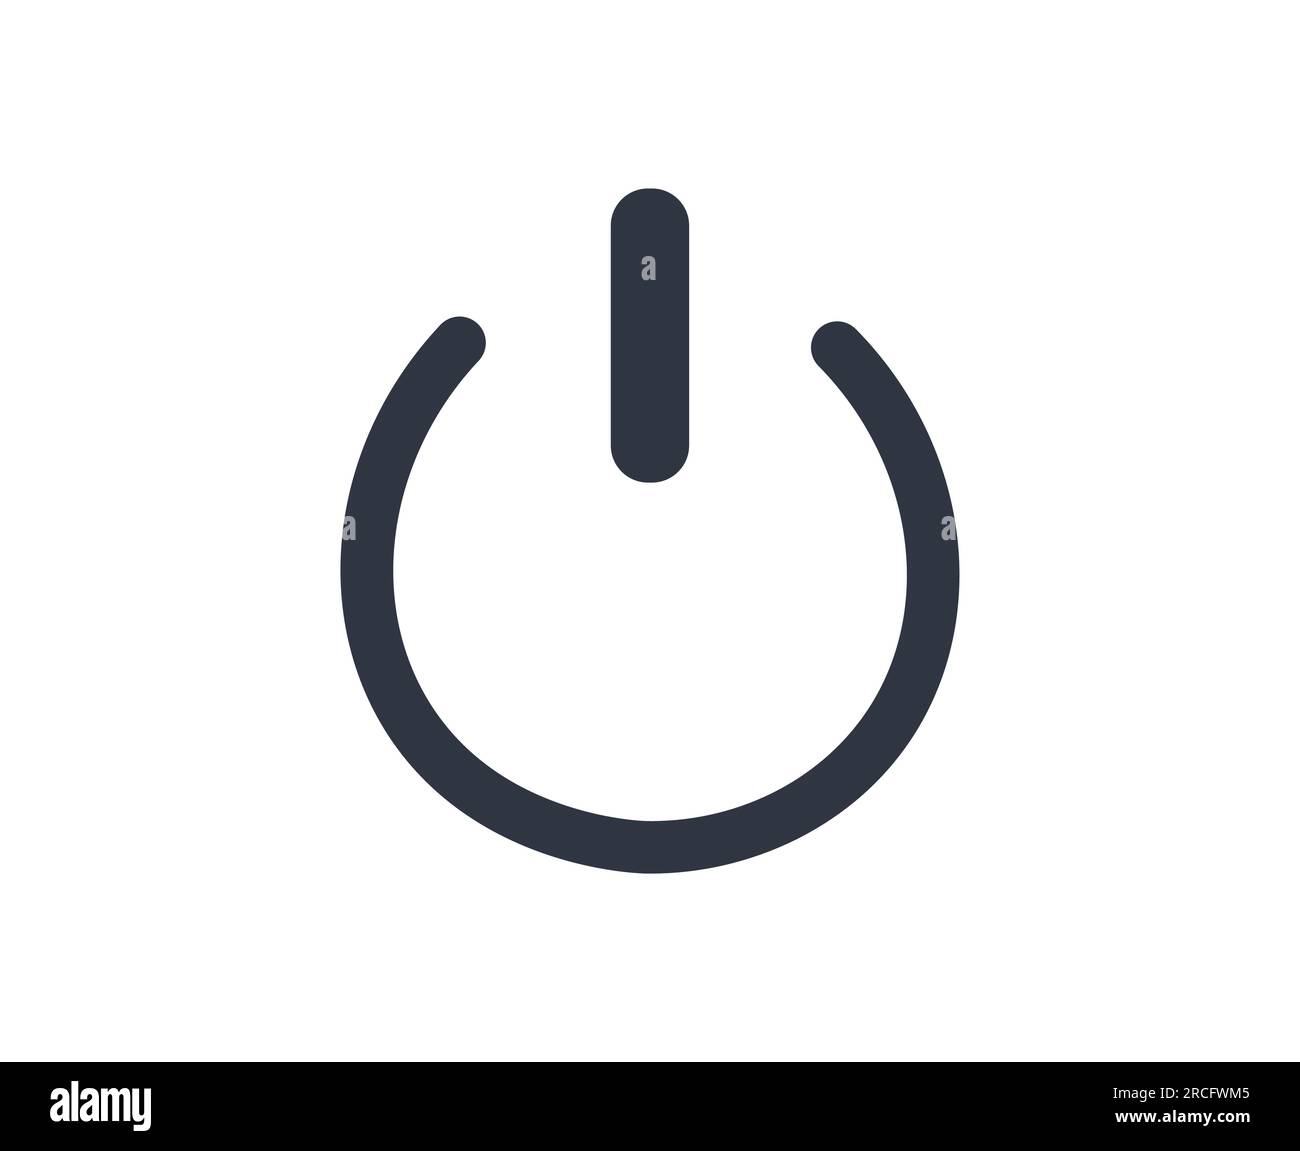 Power Stand By Symbol. Graphical symbols for use on equipment. Stock Vector